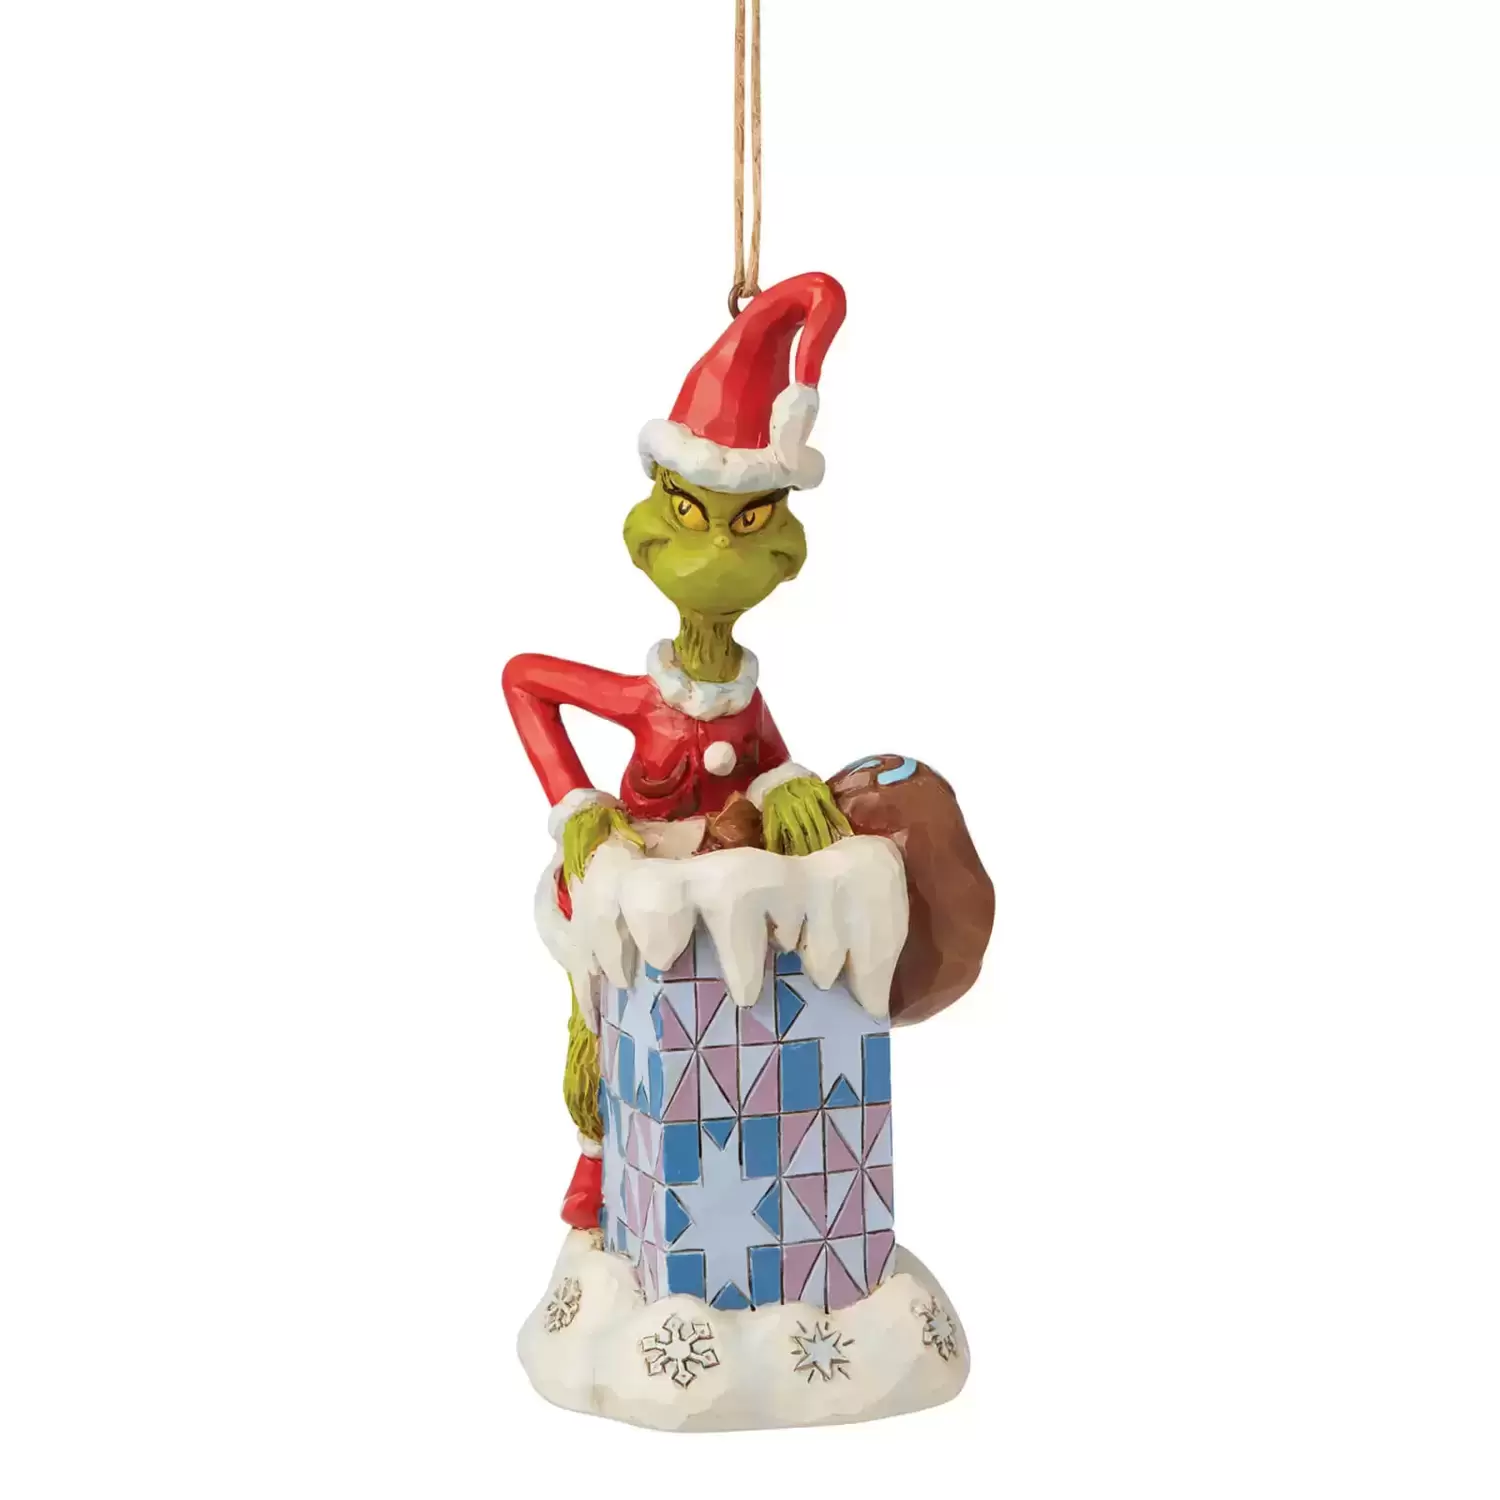 Dr Seuss by Jim Shore - Grinch in Chimney Ornament